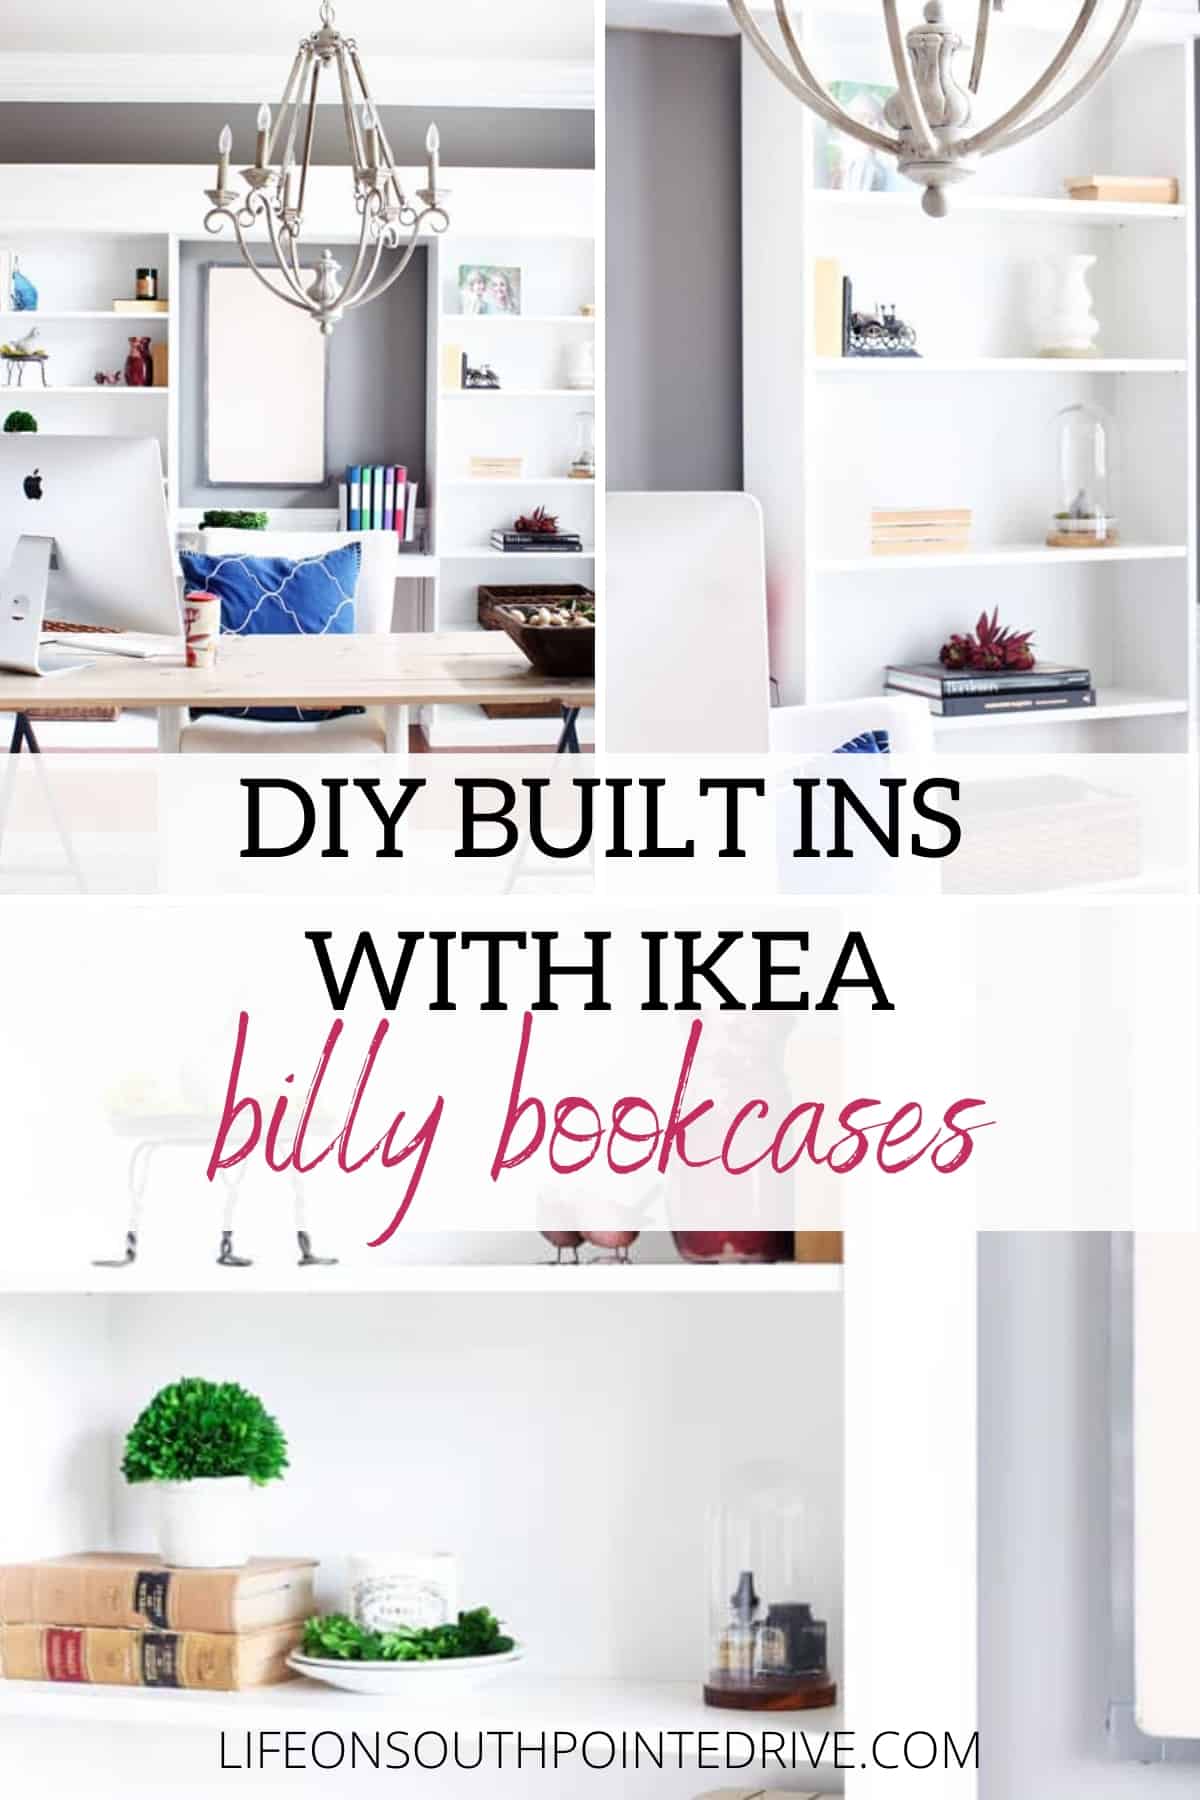 Diy Built Ins With Ikea Billy Bookcases, Can You Cut Down A Billy Bookcase